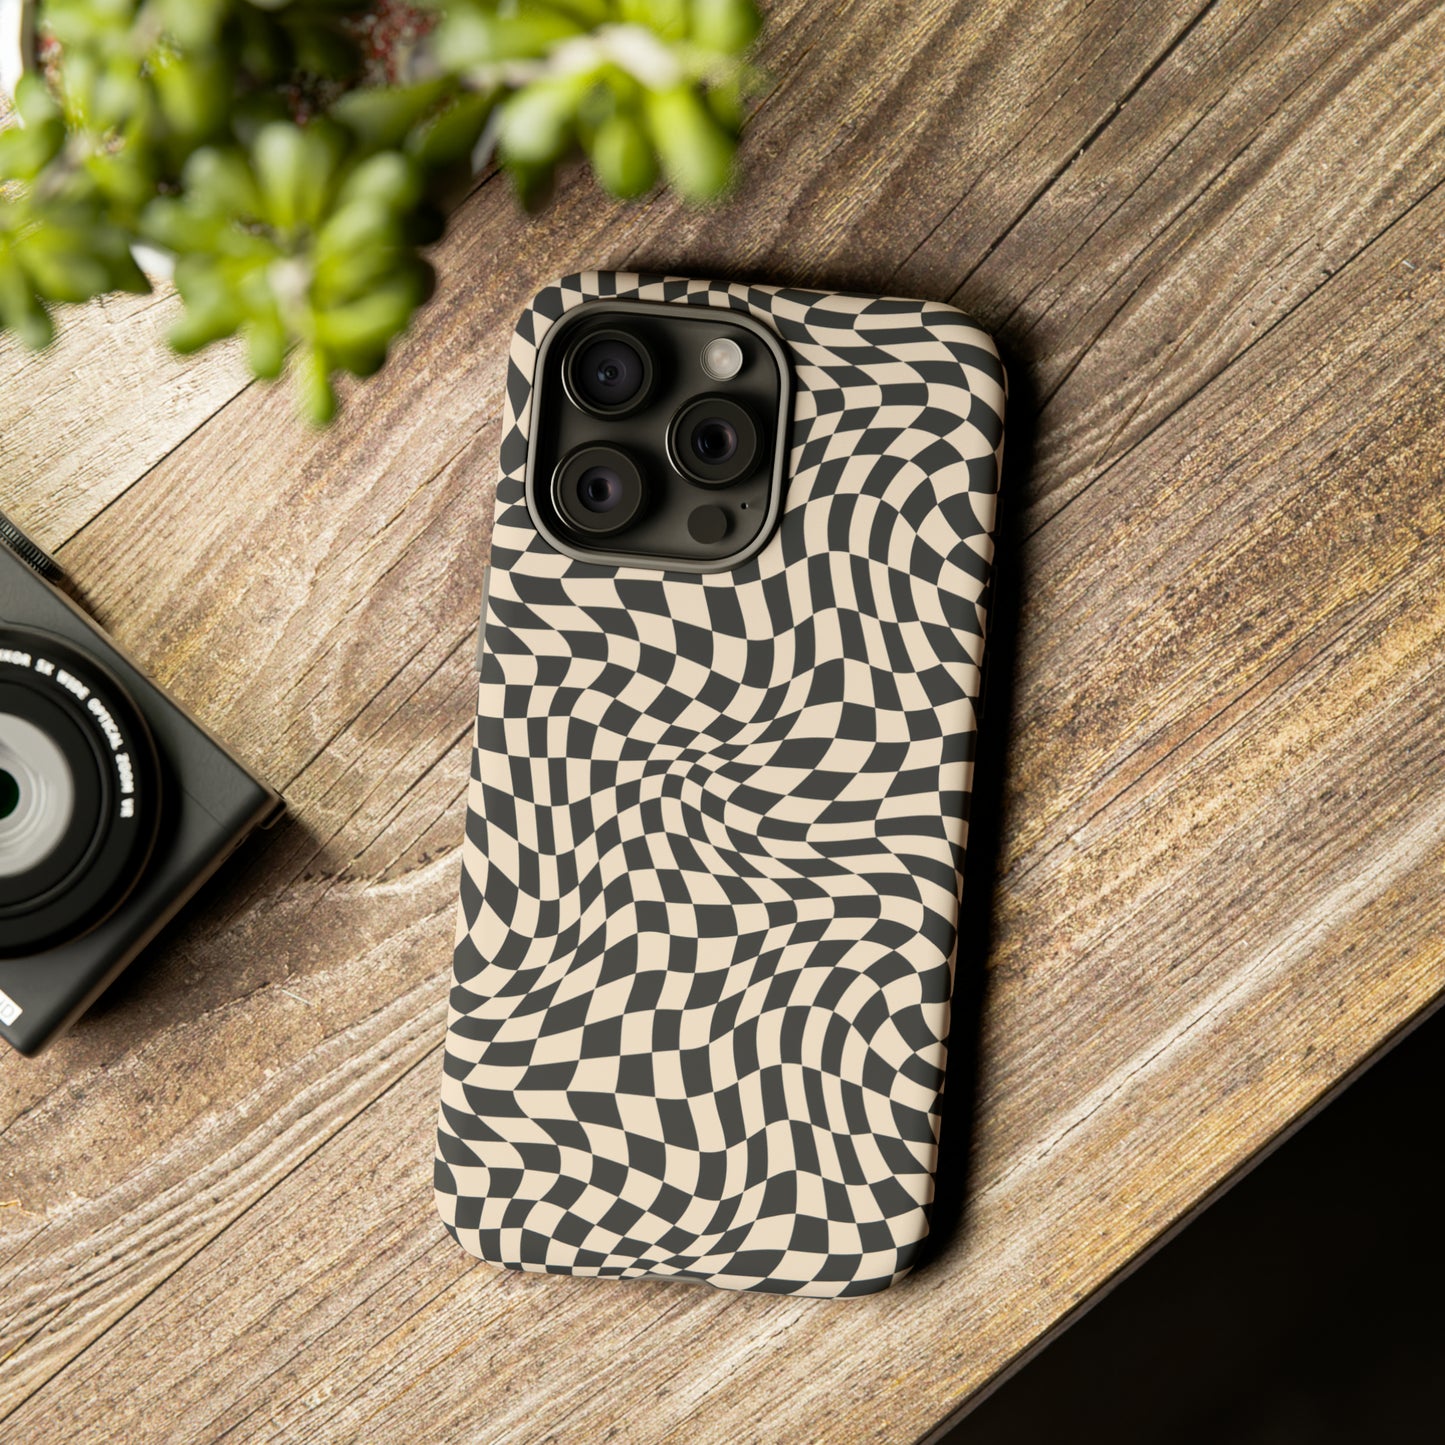 Trippy Checkered Tough Phone Case for Iphones, Samsungs, and Google phones